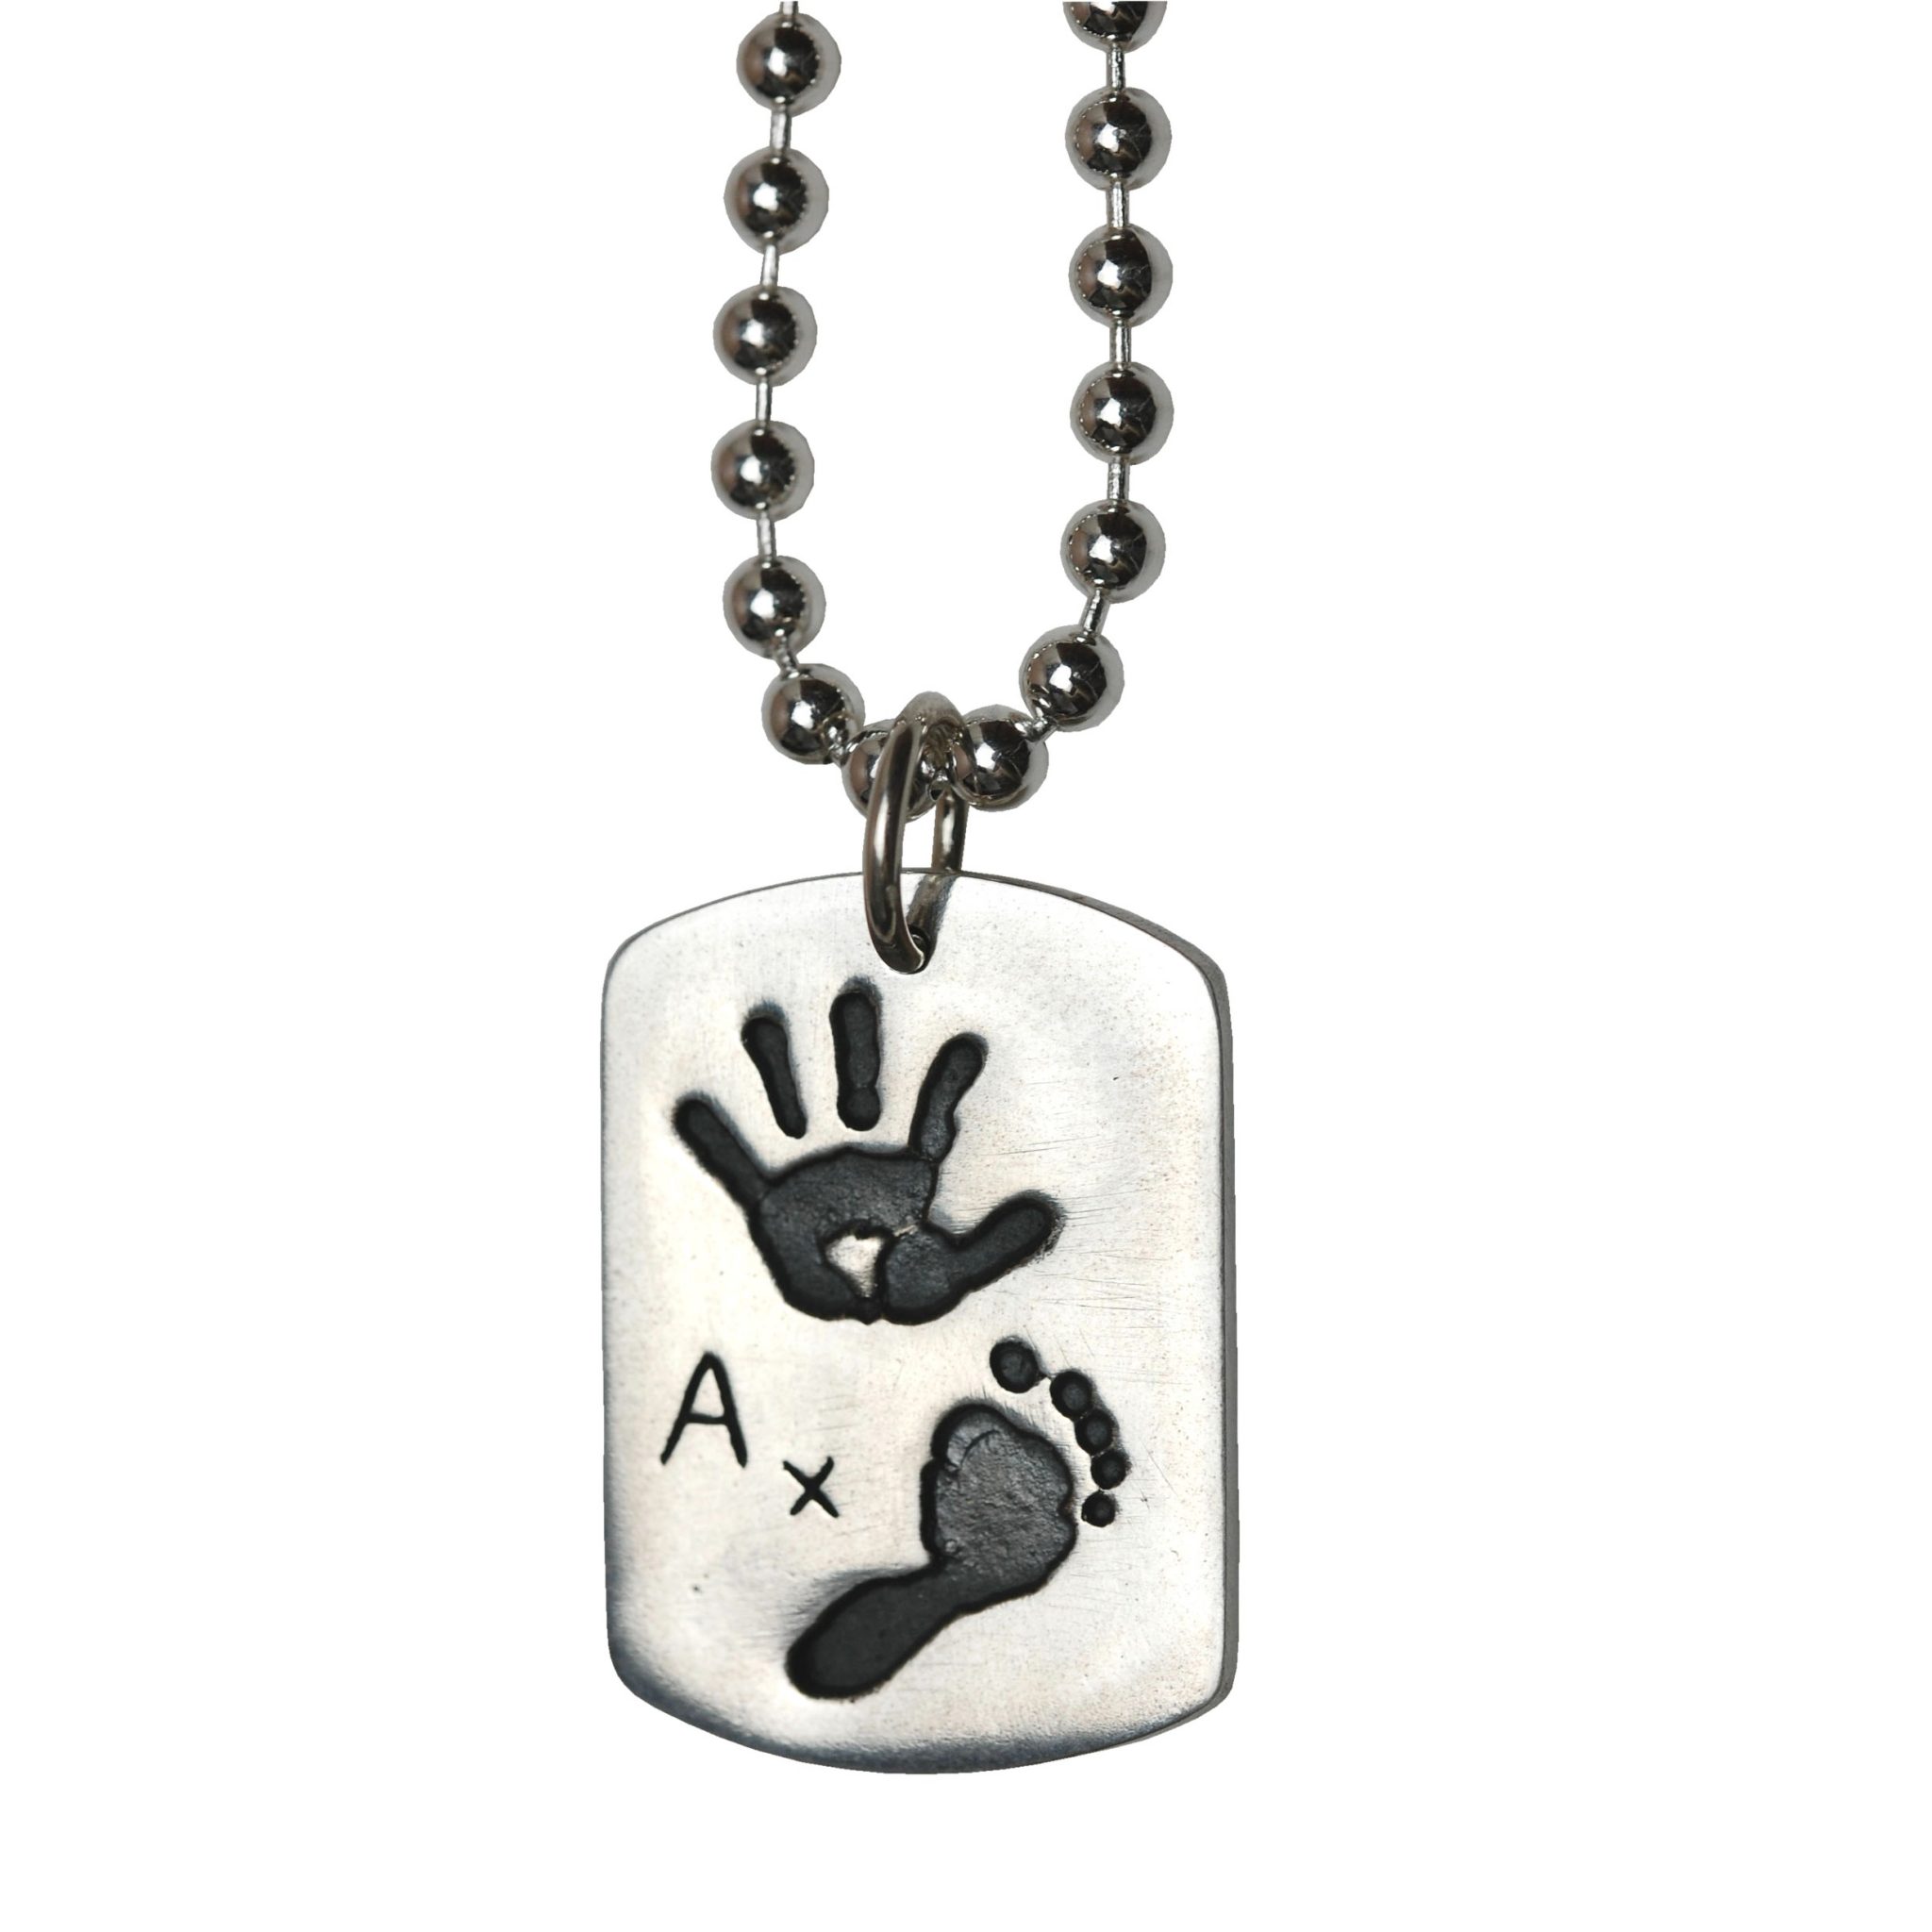 Large silver dog tag with hand and footprint on a silver ball chain